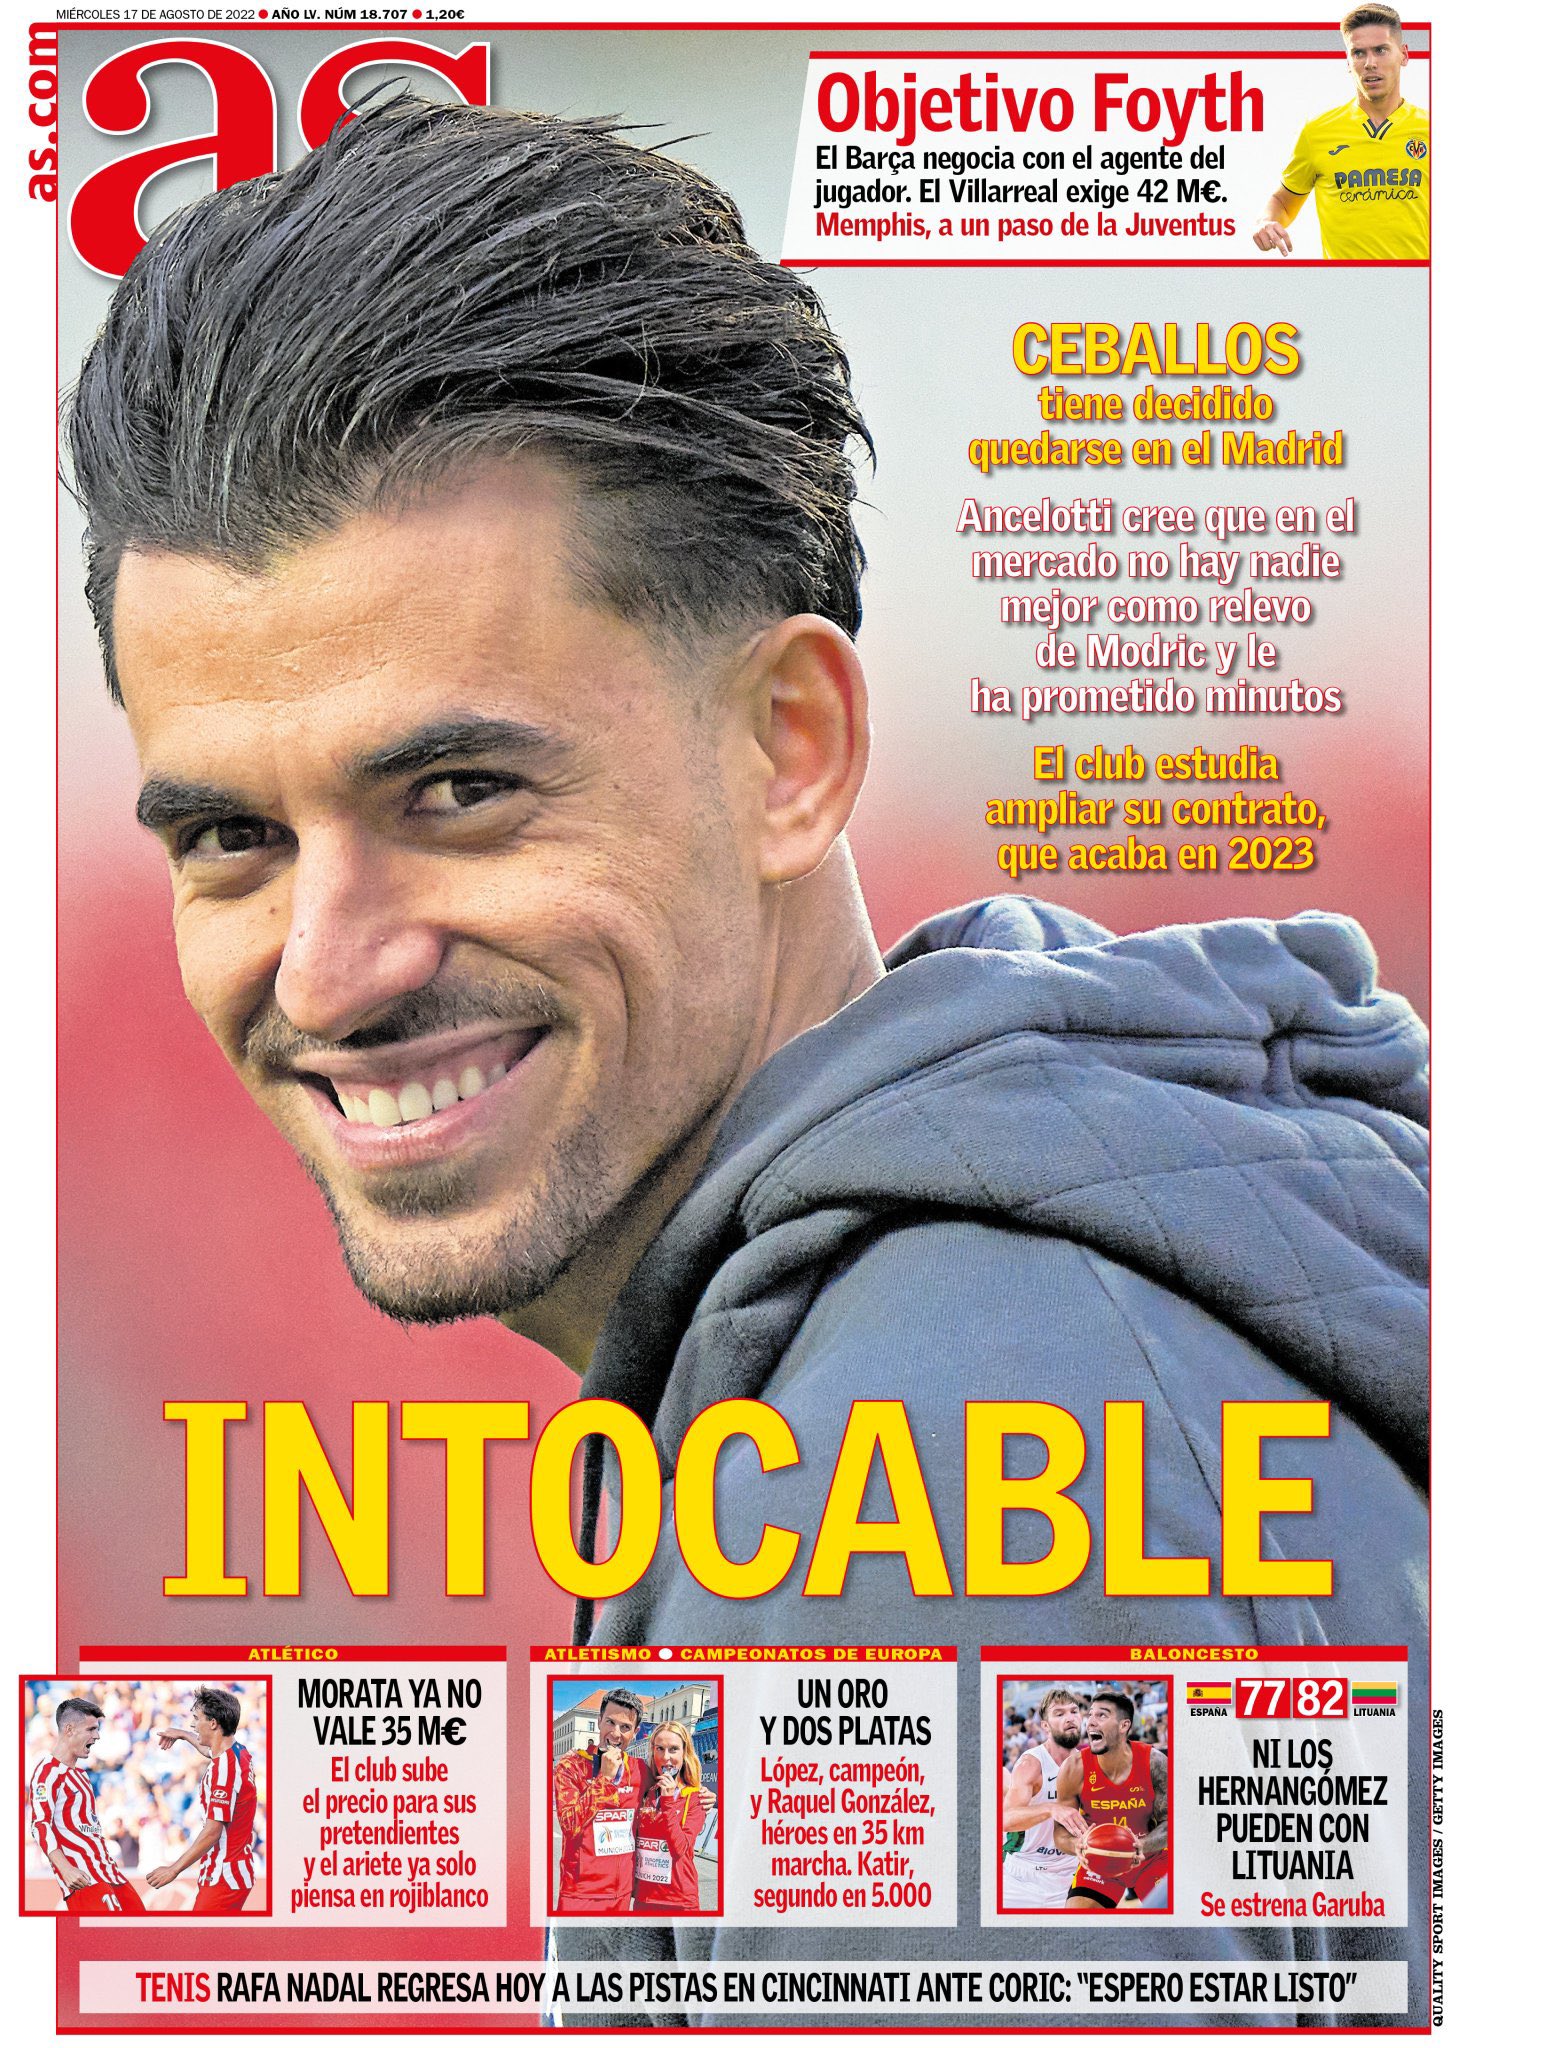 Real Madrid Info ³⁵ on Twitter: "🗞 AS's Cover | Untouchable: Ceballos has  decided to stay in Madrid. https://t.co/rO8WqNILFW" / Twitter